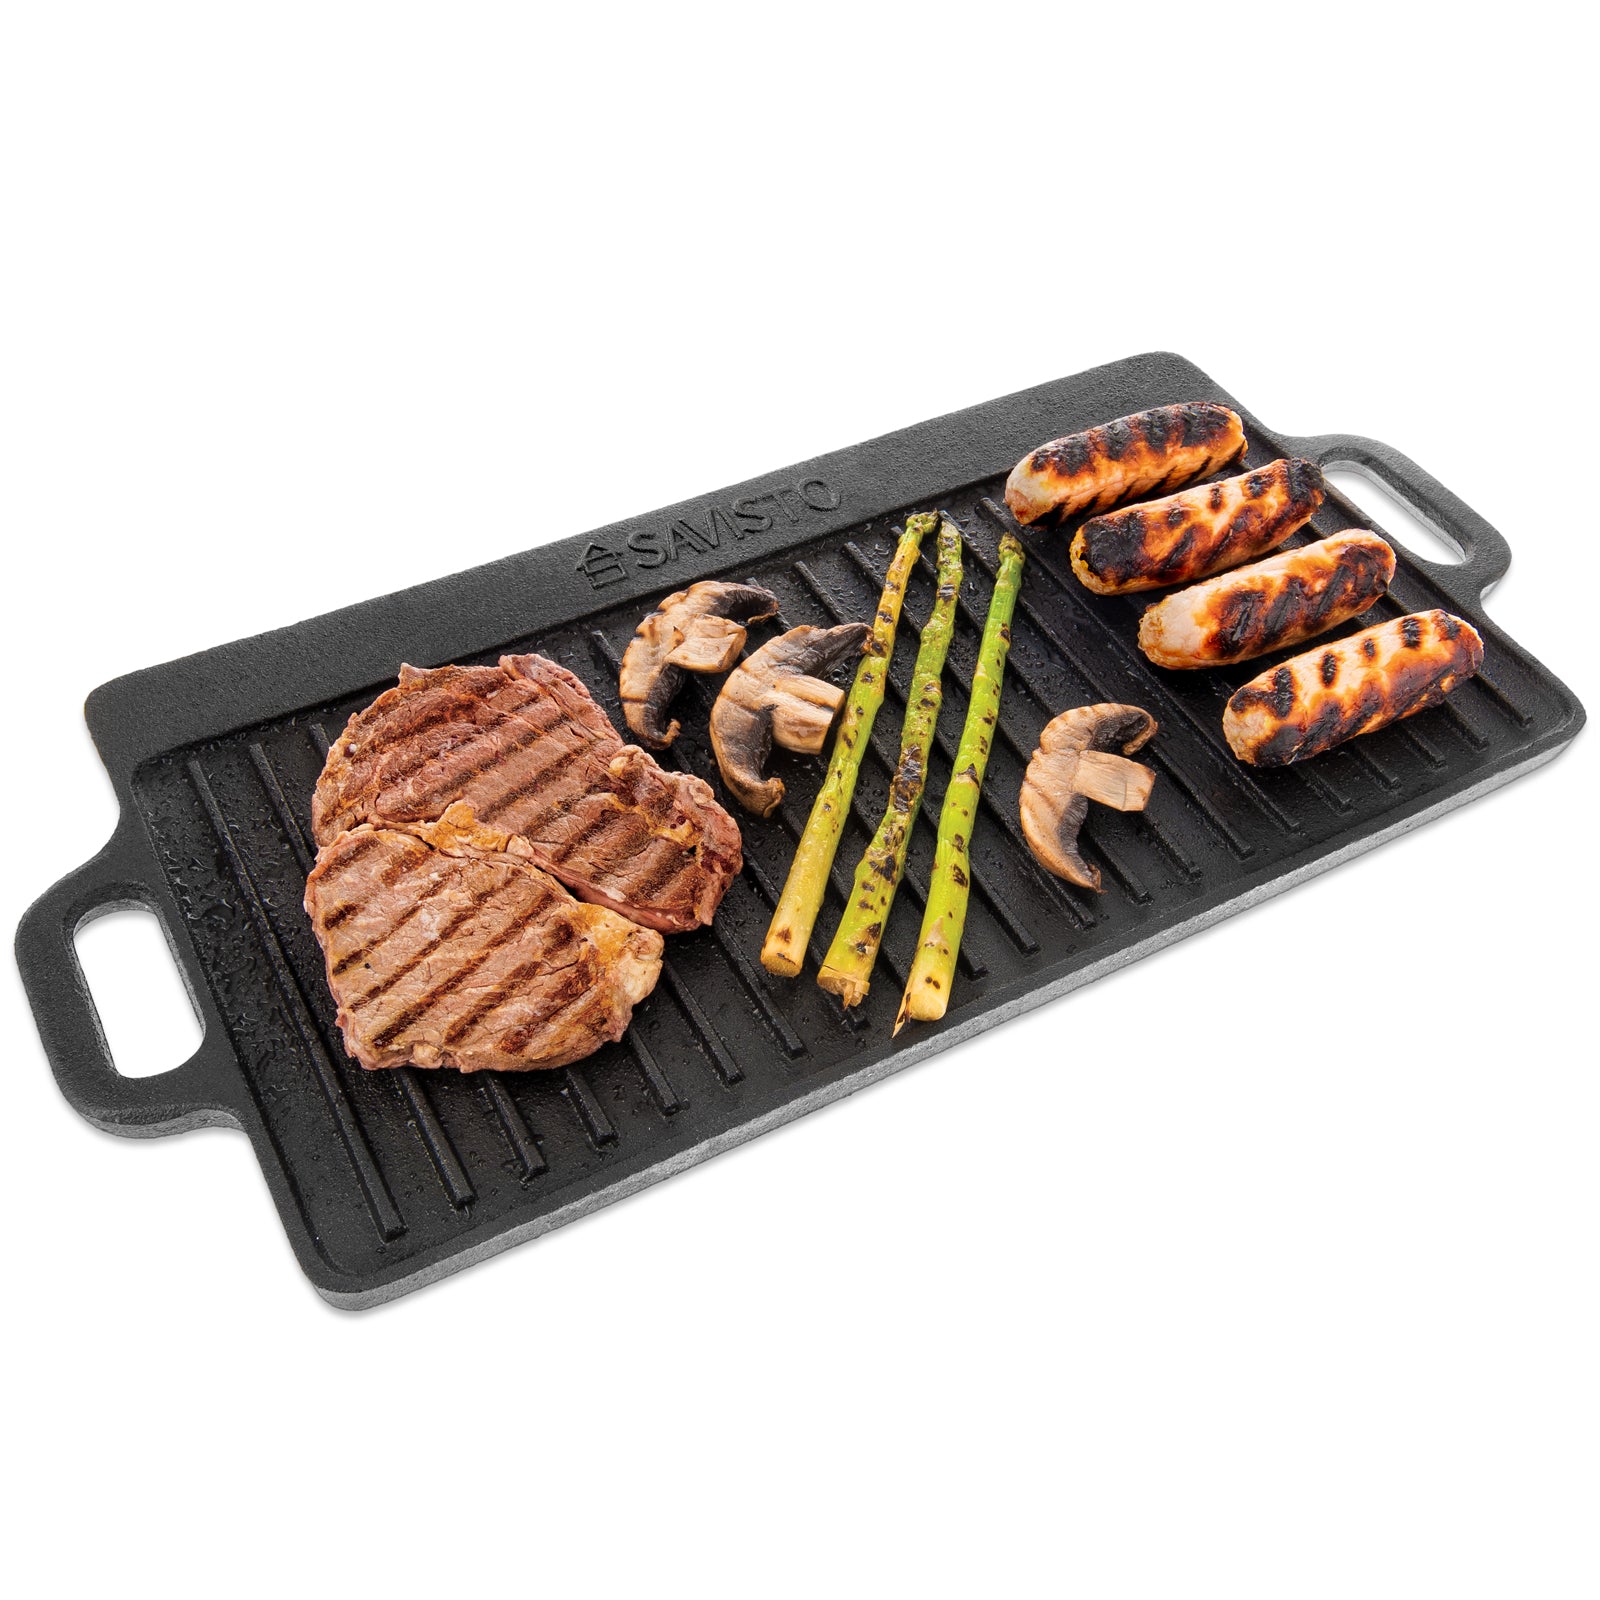  COVERCOOK Griddle Pan, Cast Iron Grill Hot Plate